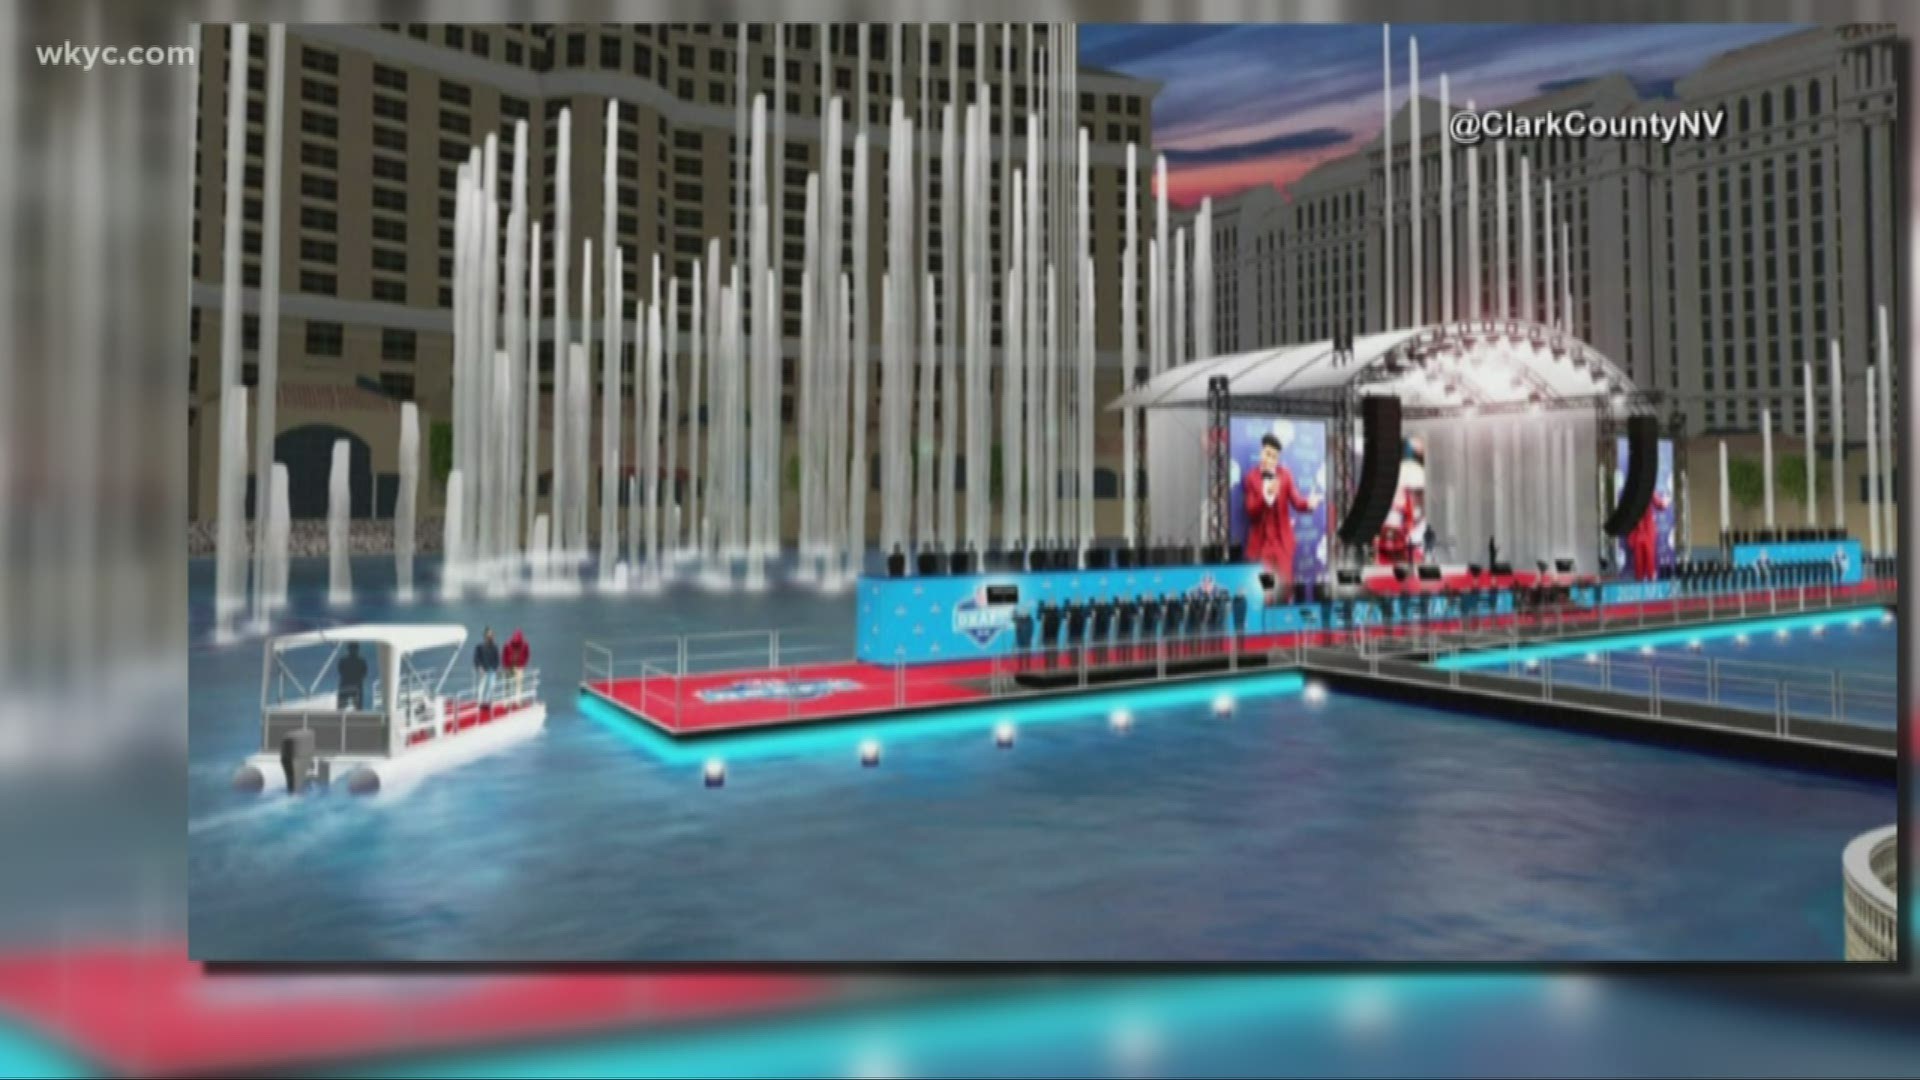 The plan is to have the stage set up on the water in front of the famous Bellagio fountains. And get this,  drafted players will take a boat to get to the stage.